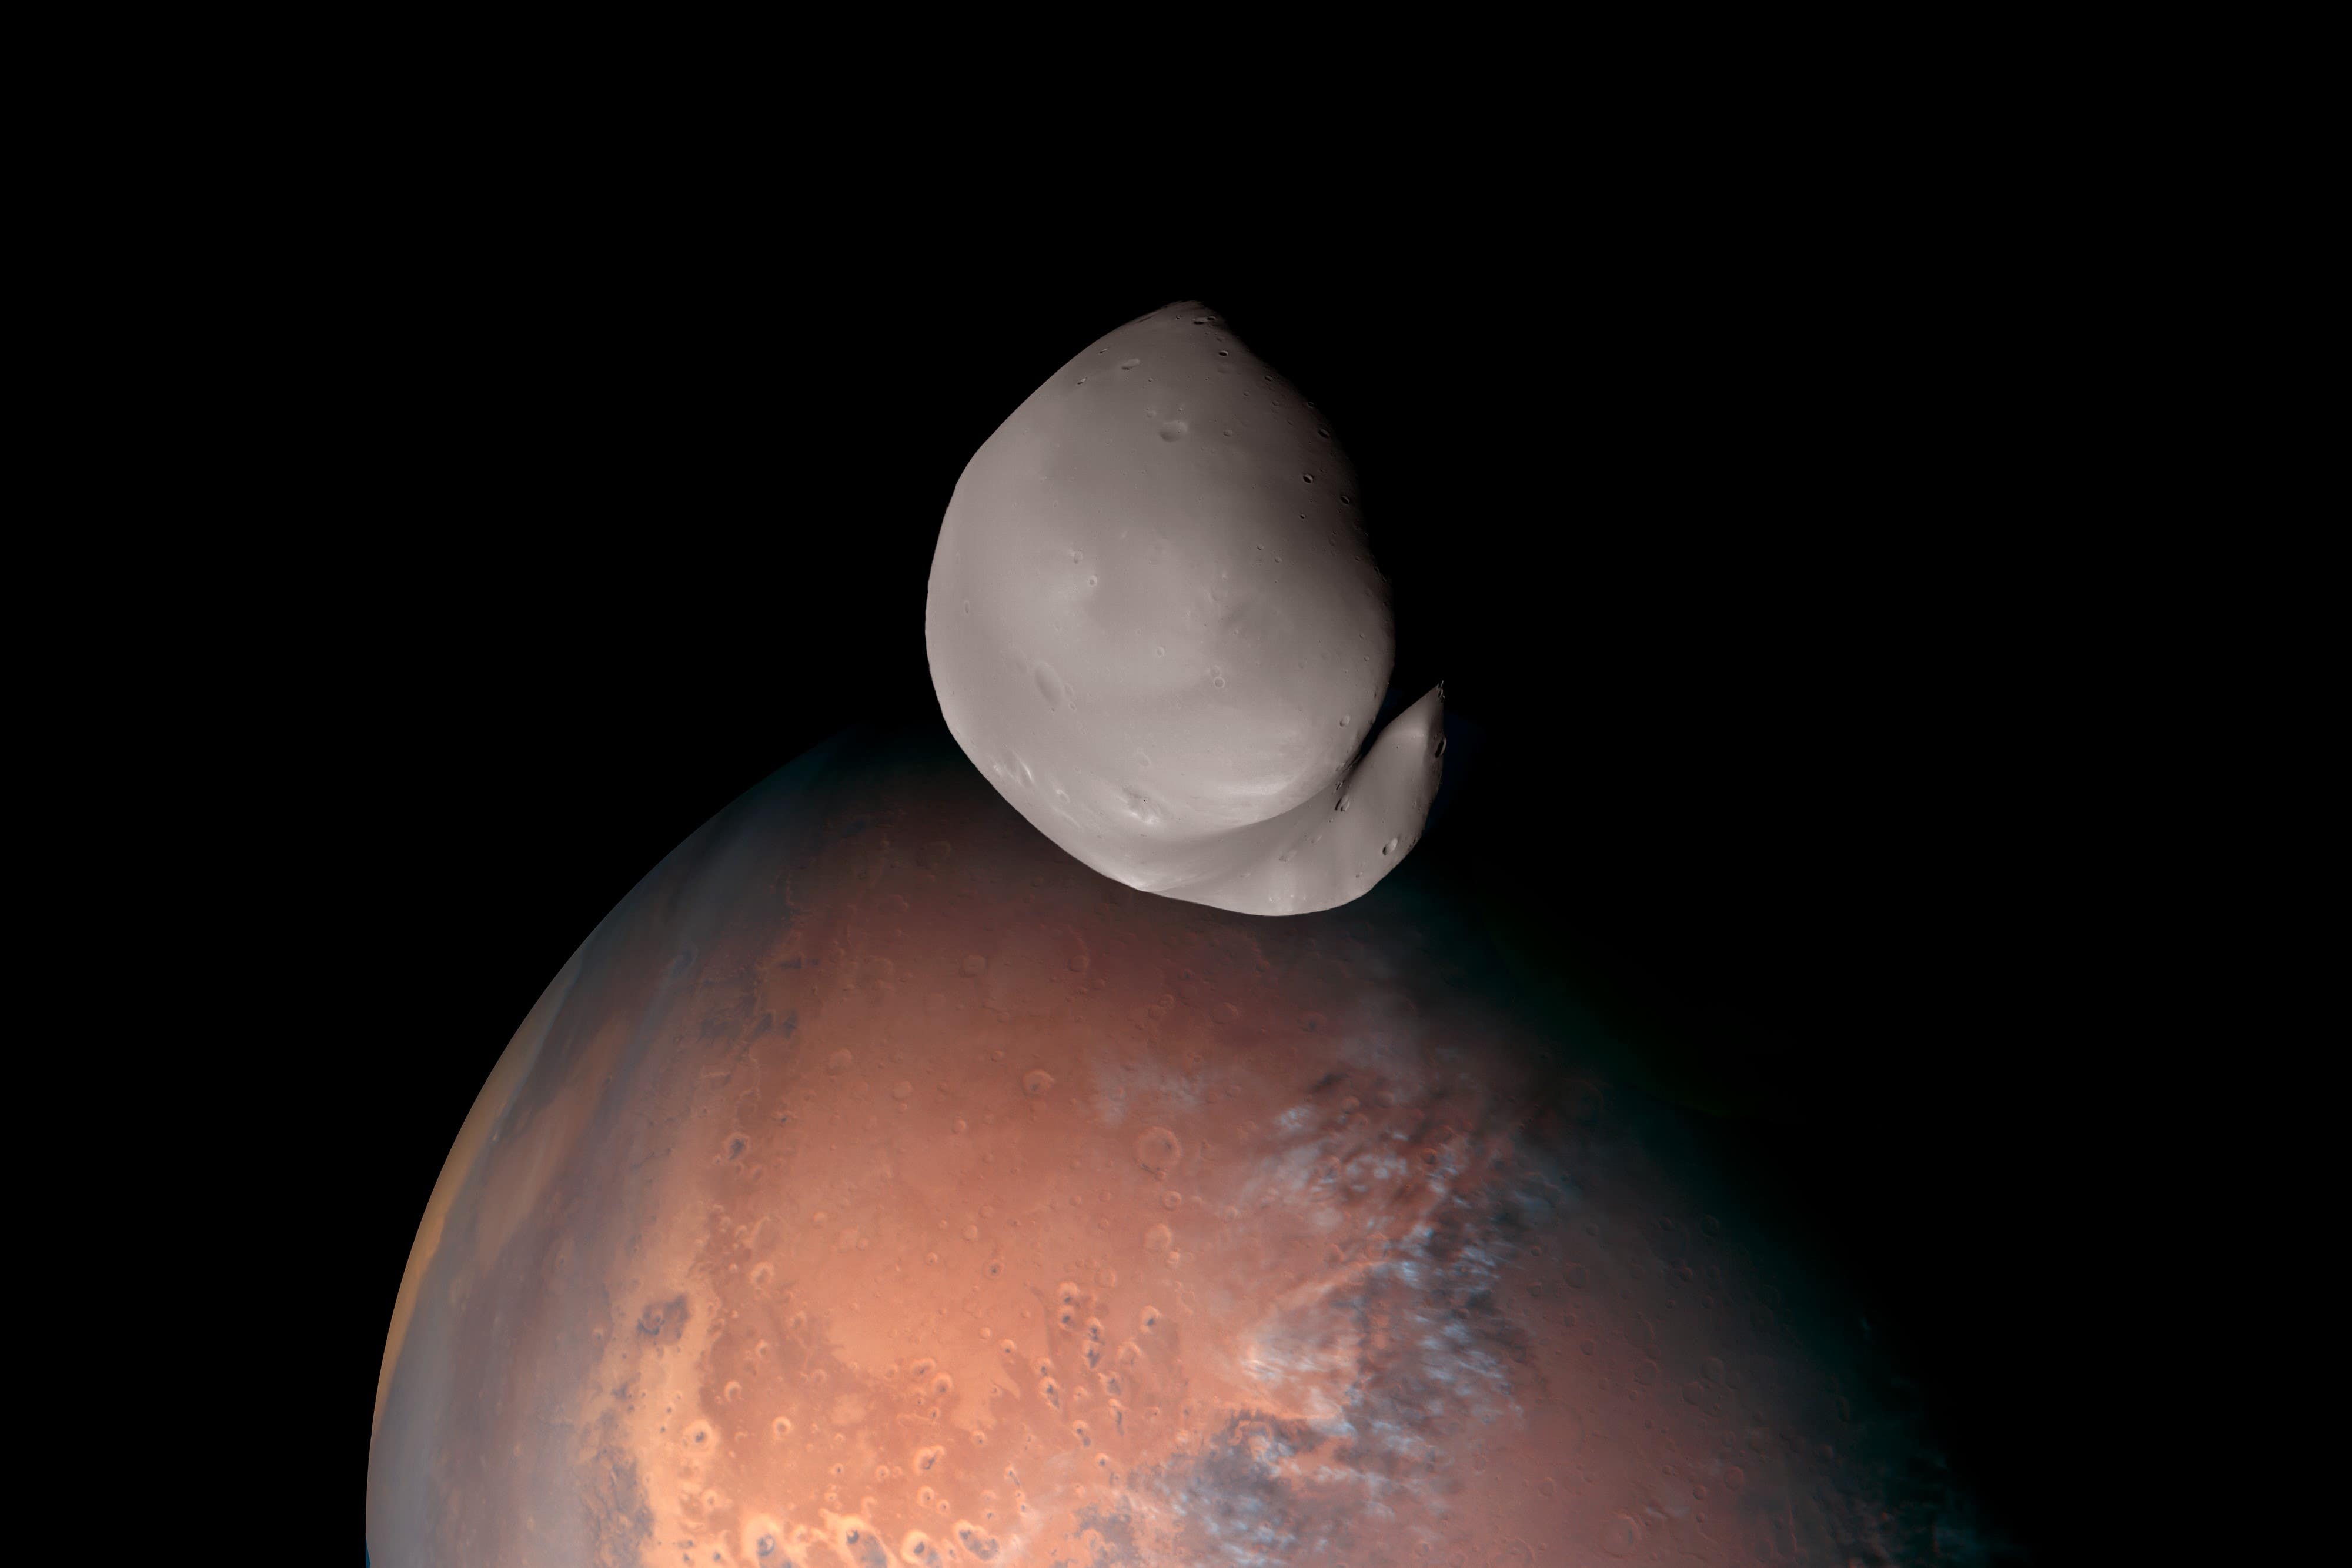 First ever high-res images and observations of Mars’ moon Deimos released (Emirates Mars Mission/PA)